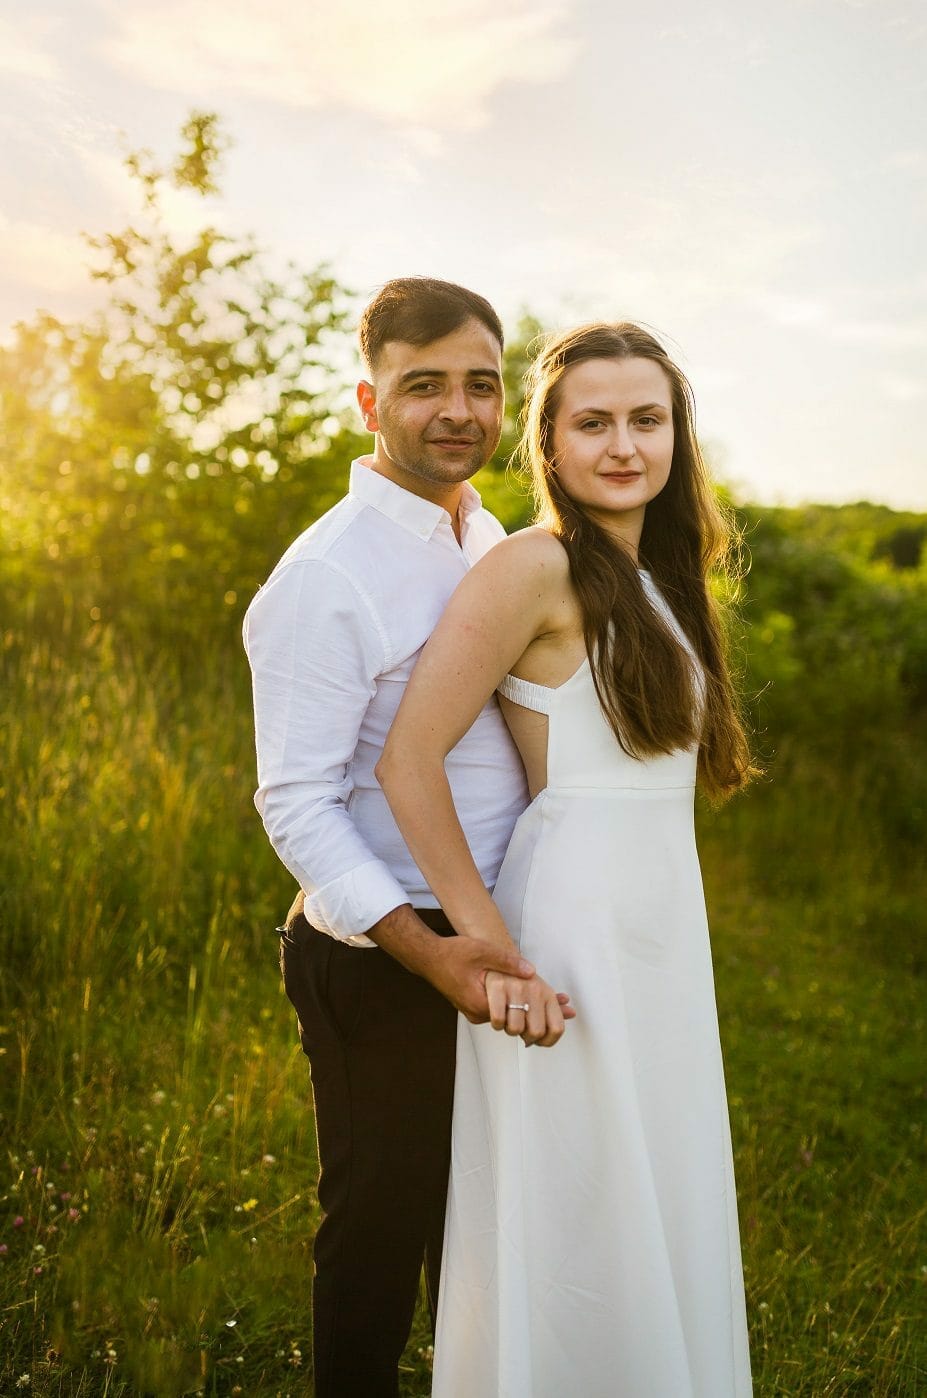 A photograph of a newly engaged couple in the sunset, taken by Somerset Photographer Victoria Welton